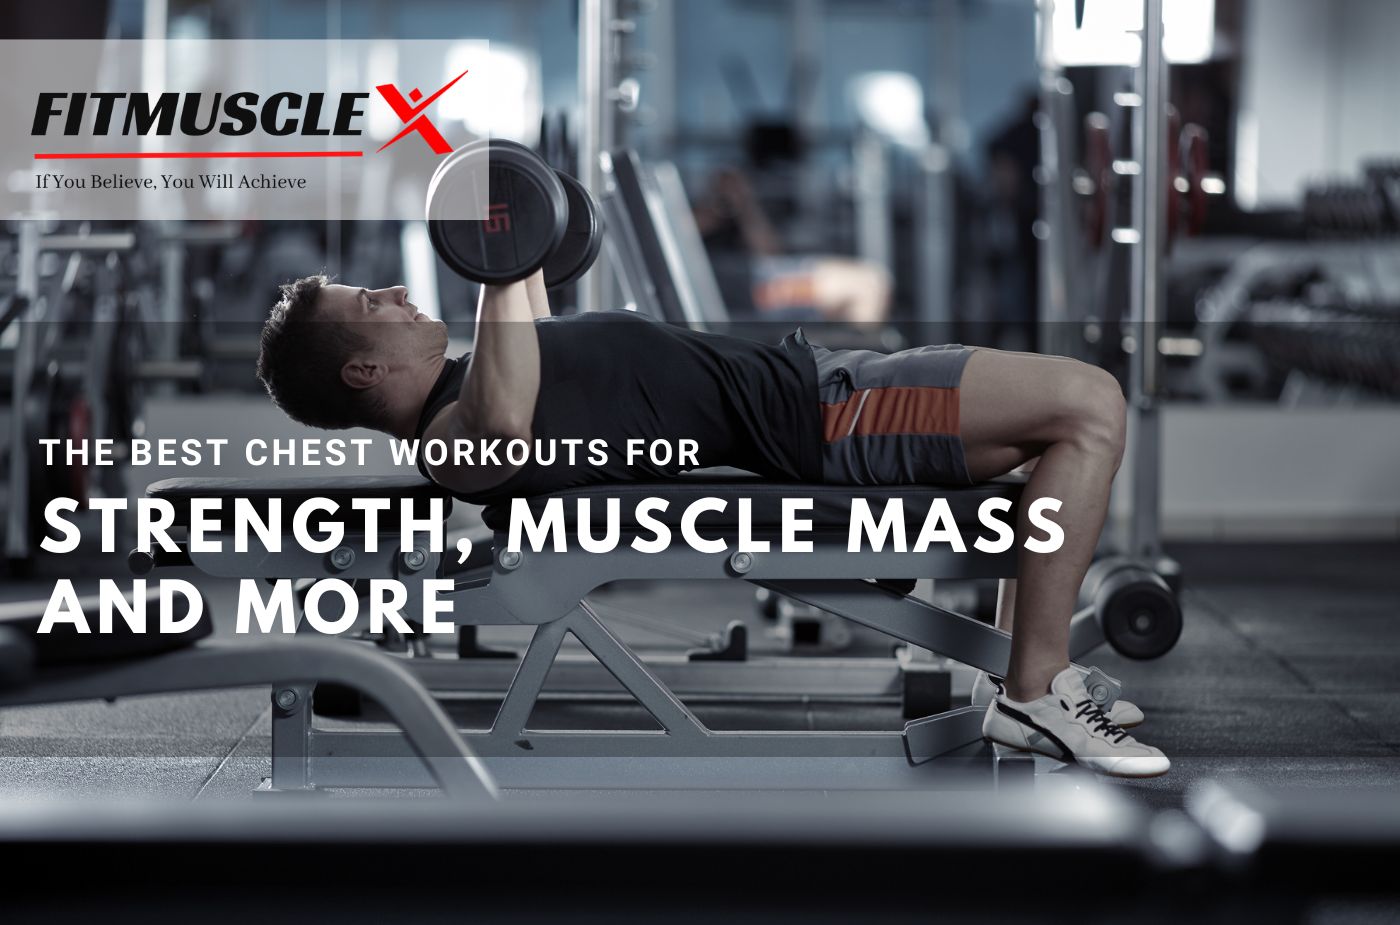 The Best Chest Workouts for Strength Muscle Mass and More - Uttar Pradesh - Noida ID1554640